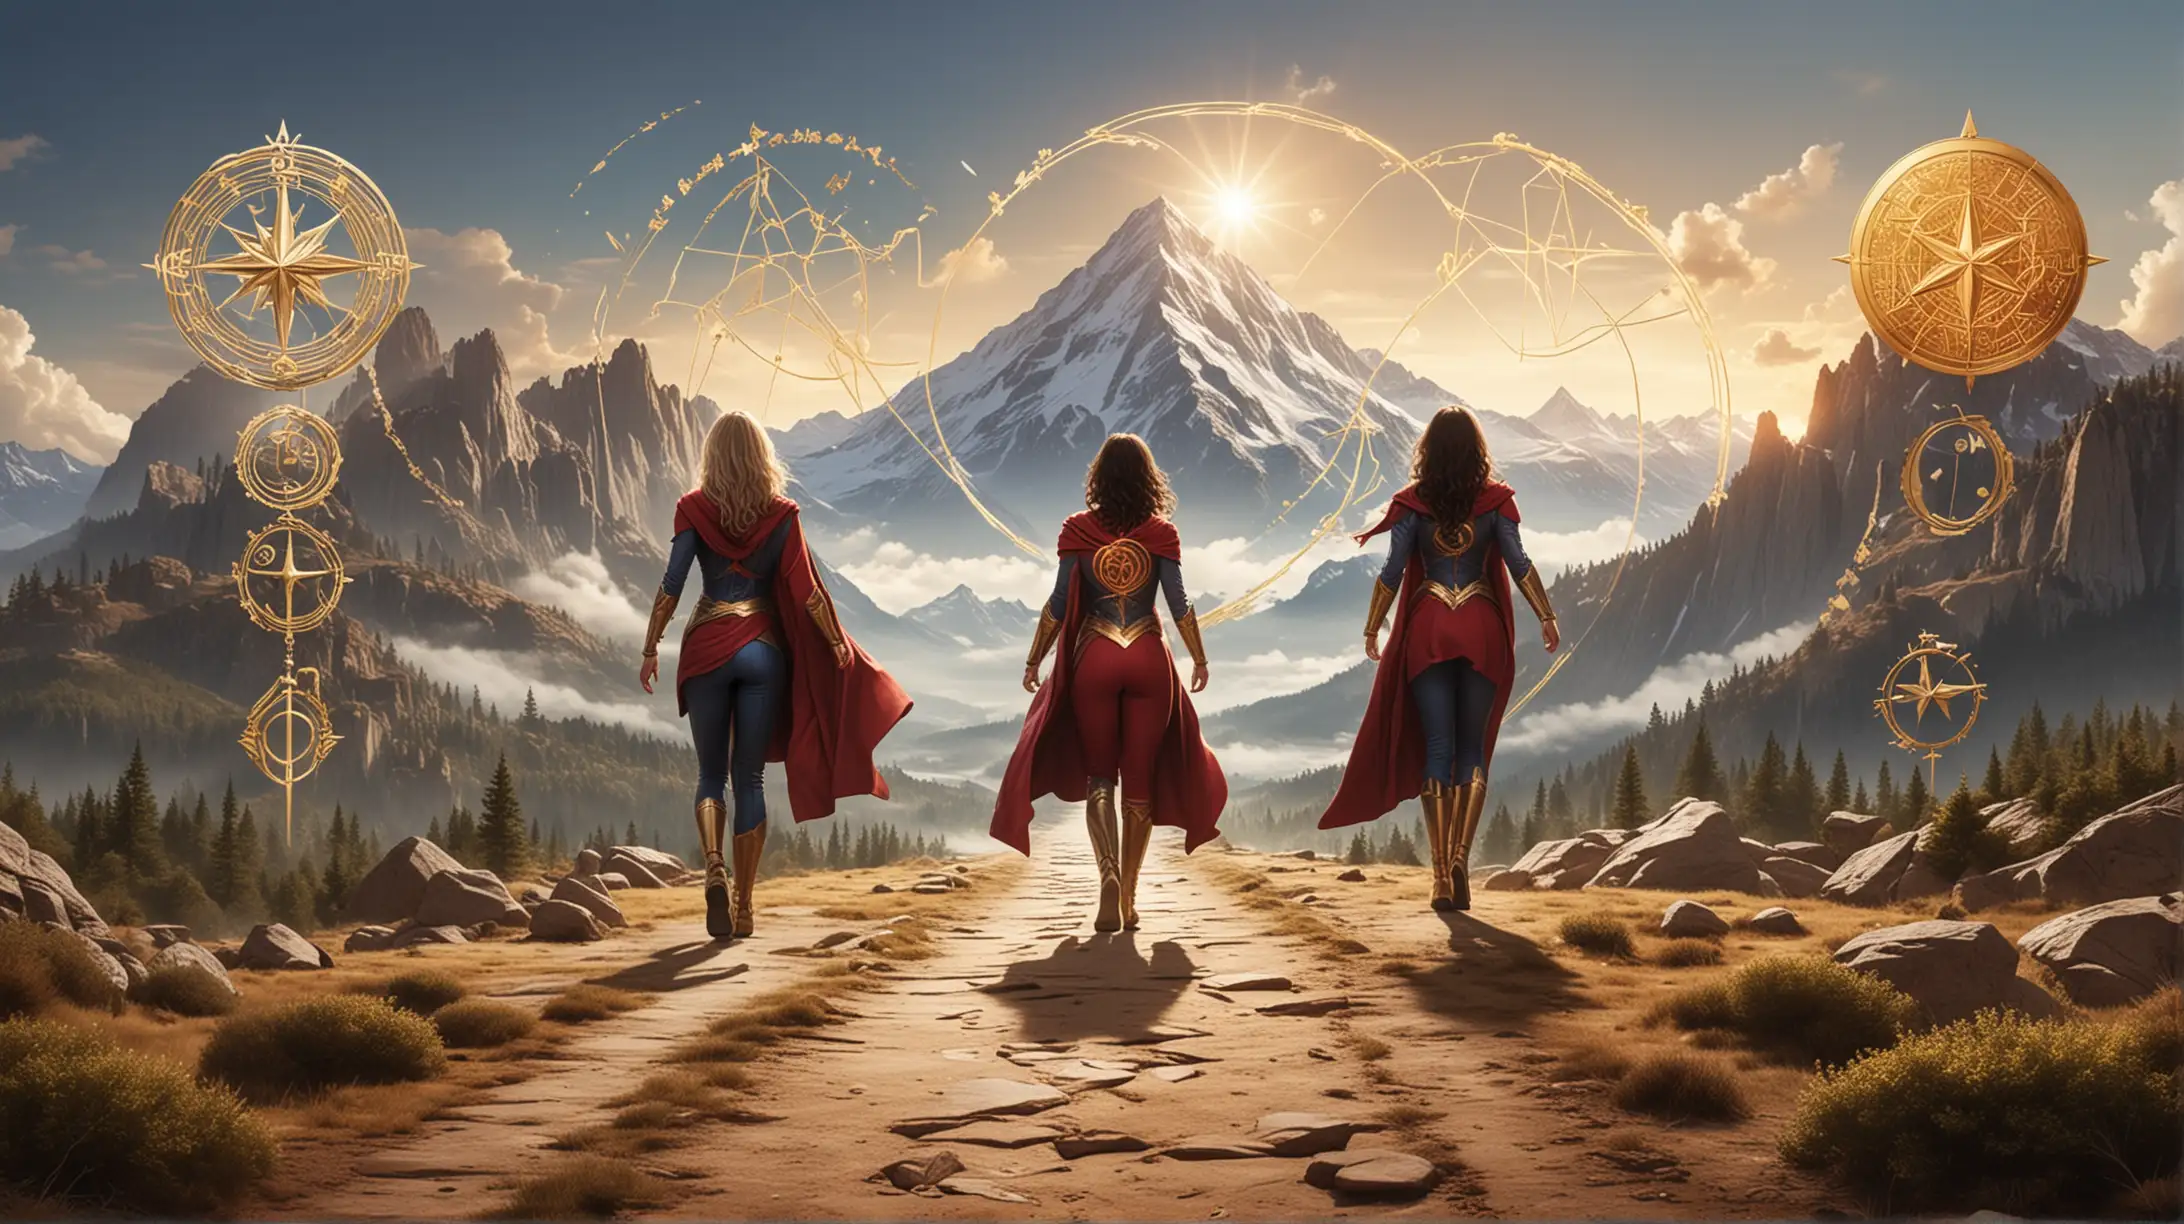 Create an image that symbolizes the journey of discovering and following one's personal destiny with 5 stages from left to right. The path leads towards a distant, majestic mountain, representing the pursuit of a personal goal or inspired destiny. Along the path, there is a woman in superhero clothes walking, followed by 5 other diverse superheros. Various symbols of self-discovery and growth along the way: compass, ikigai, wealth dinamics, enneagram, wheel of life. At the end the brain and heart symbols in gold. 